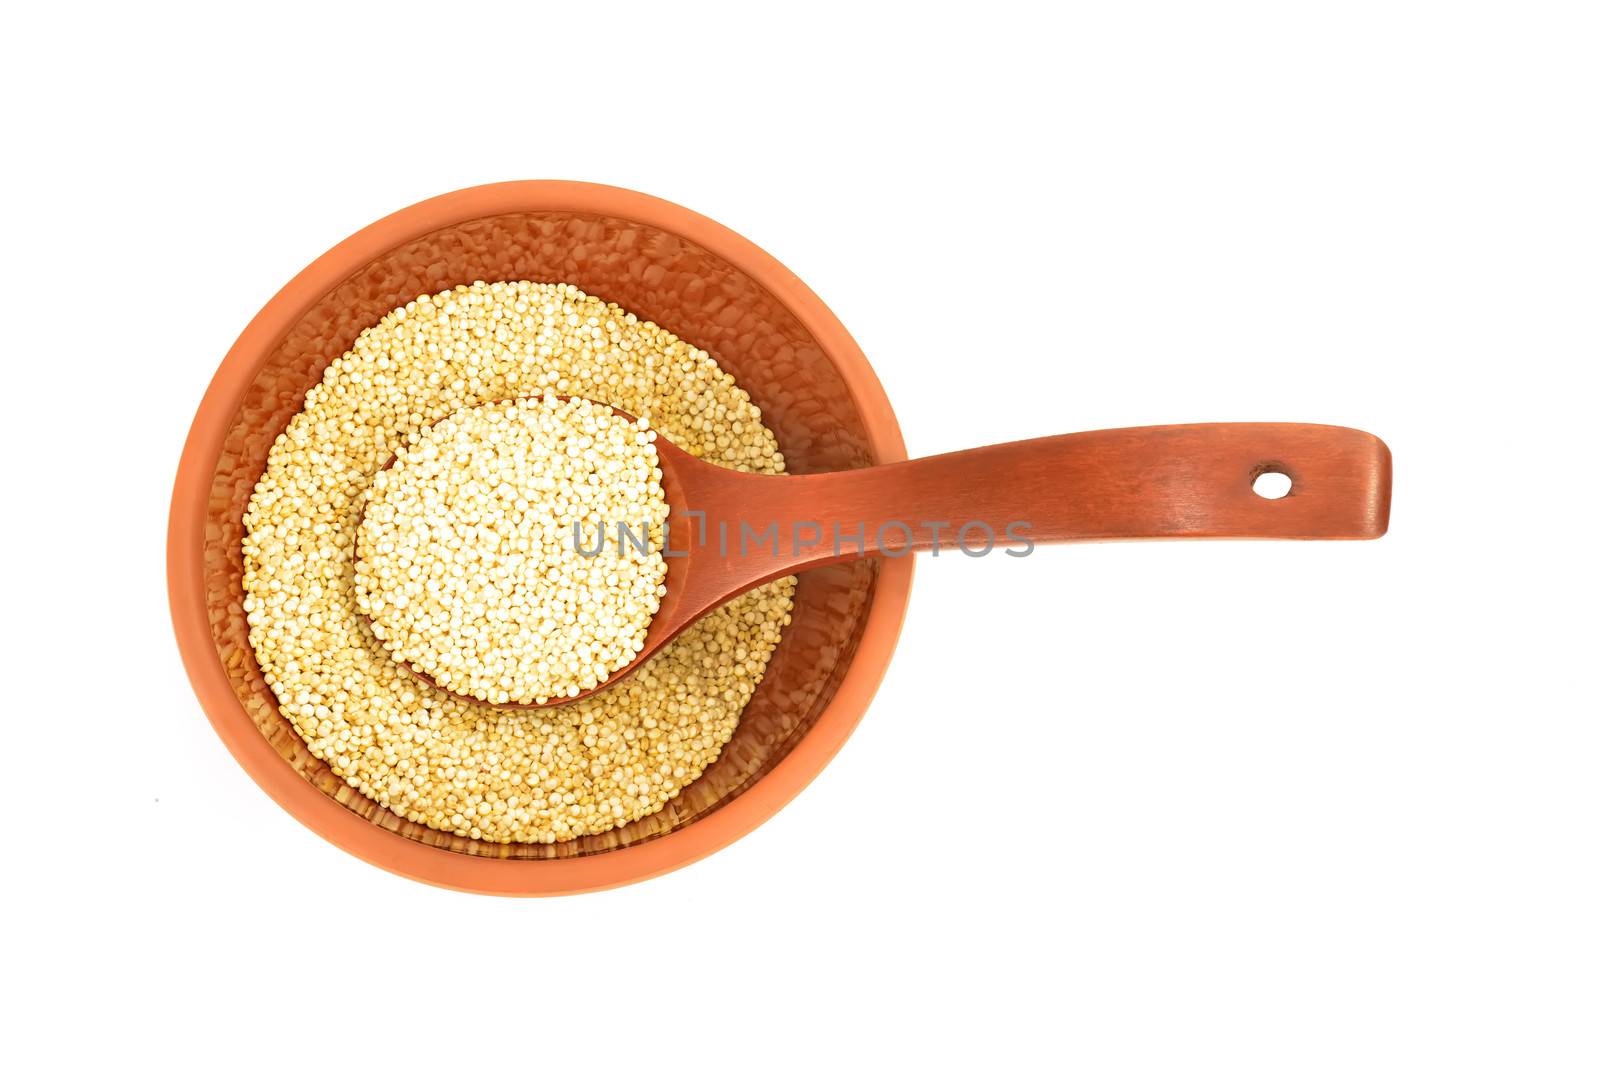 Chenopodium quinoa in clay bowl and wooden spoon by Carche